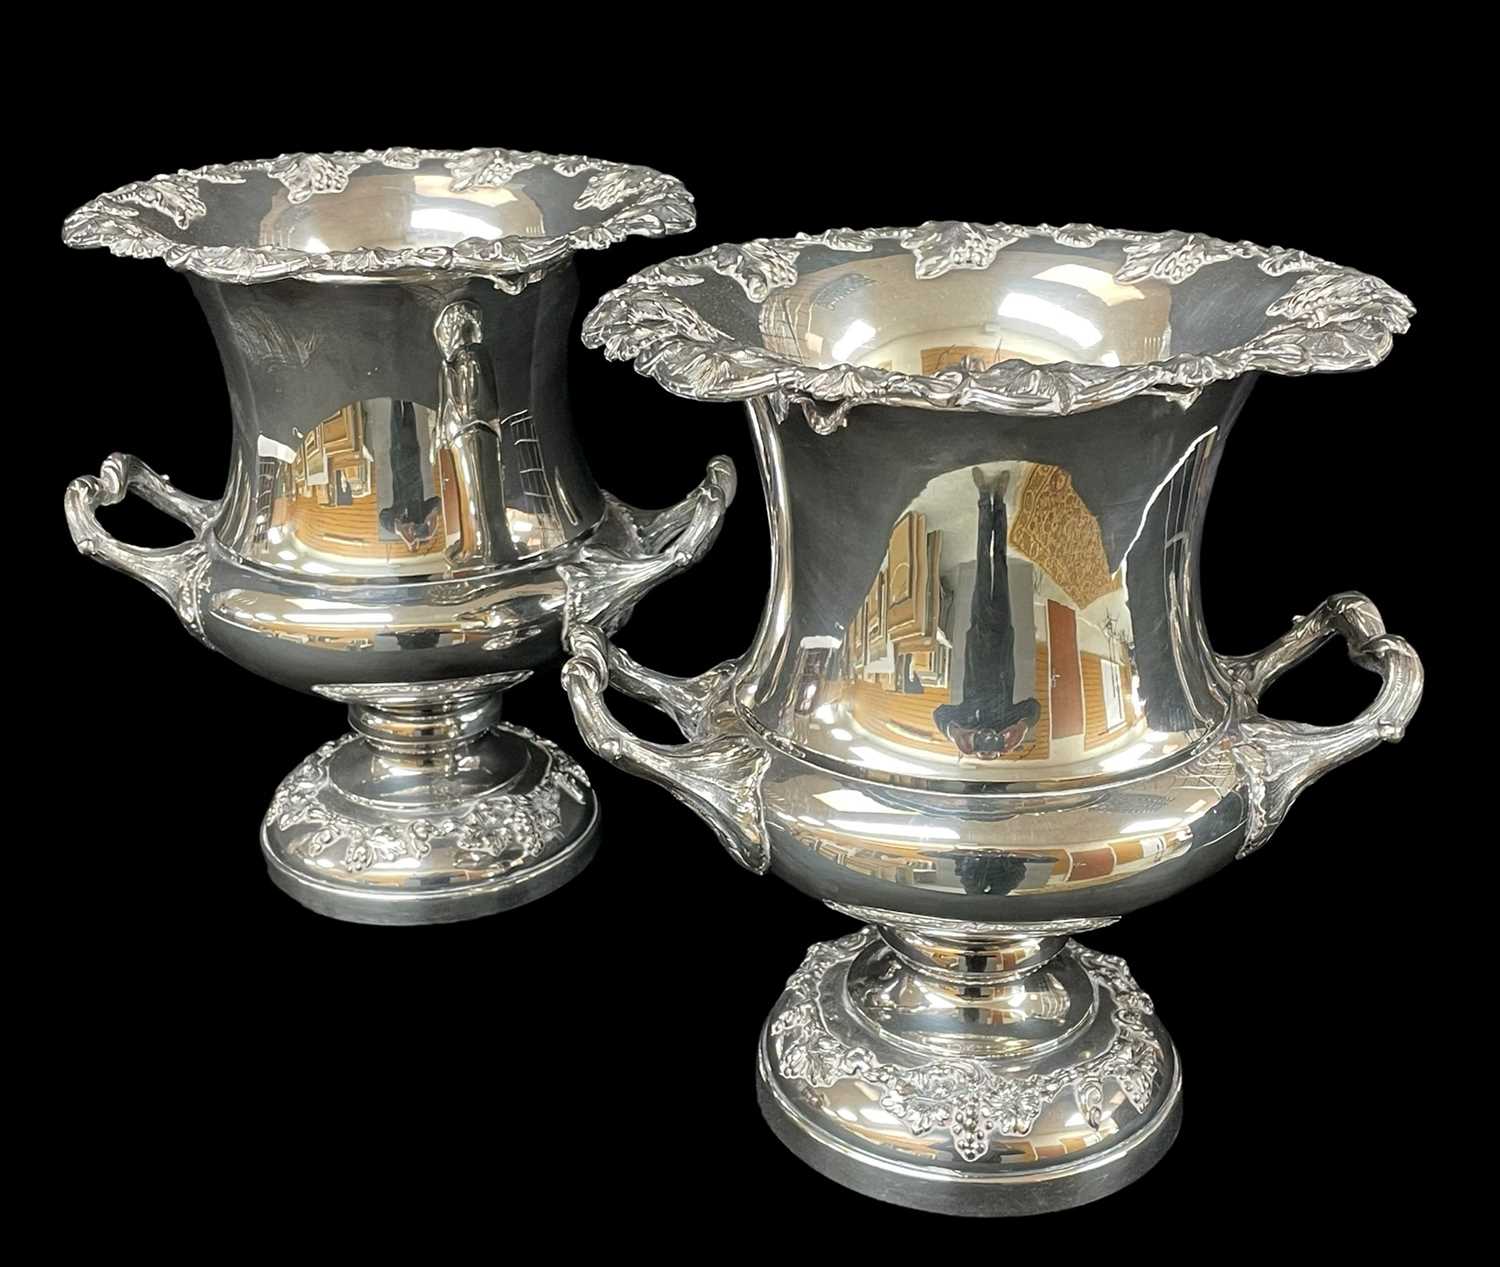 IMPRESSIVE PAIR OF ELECTROPLATED WINE COOLERS, of classical urn form with twin handles and decorated